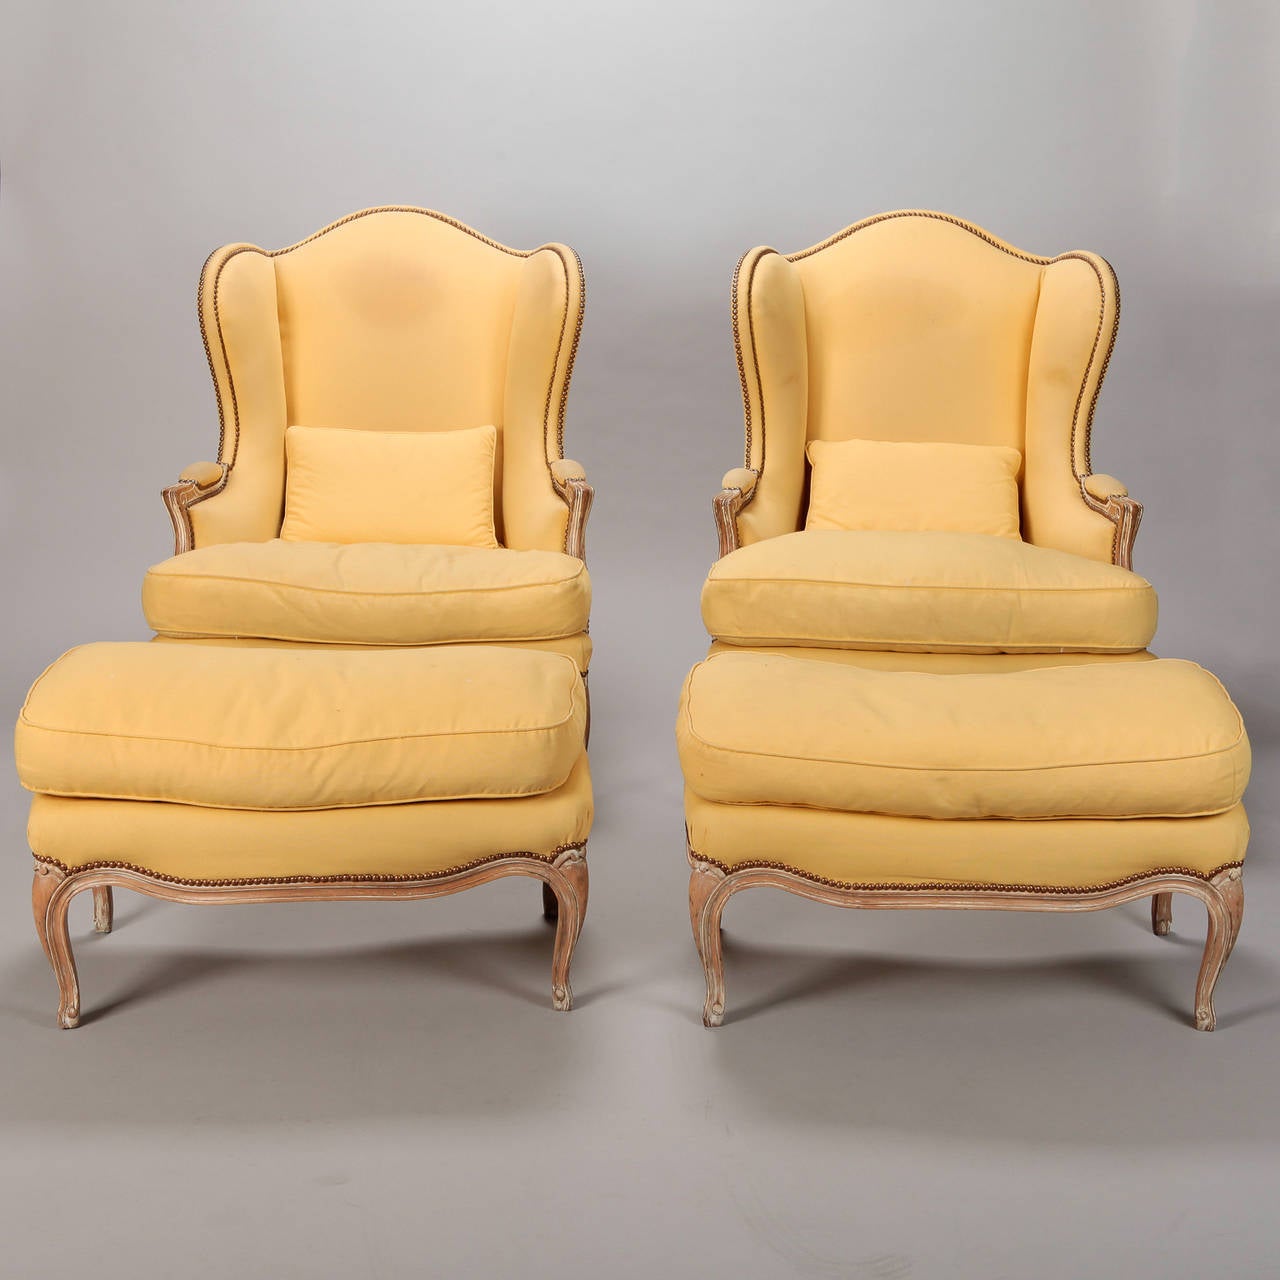 Pair circa 1920s down filled wing chairs found in France with coordinating ottomans. Details include carved wood frames, padded arms and decorative brass nail heads. Yellow fabric upholstery shows some wear and discoloration.  Structurally, the